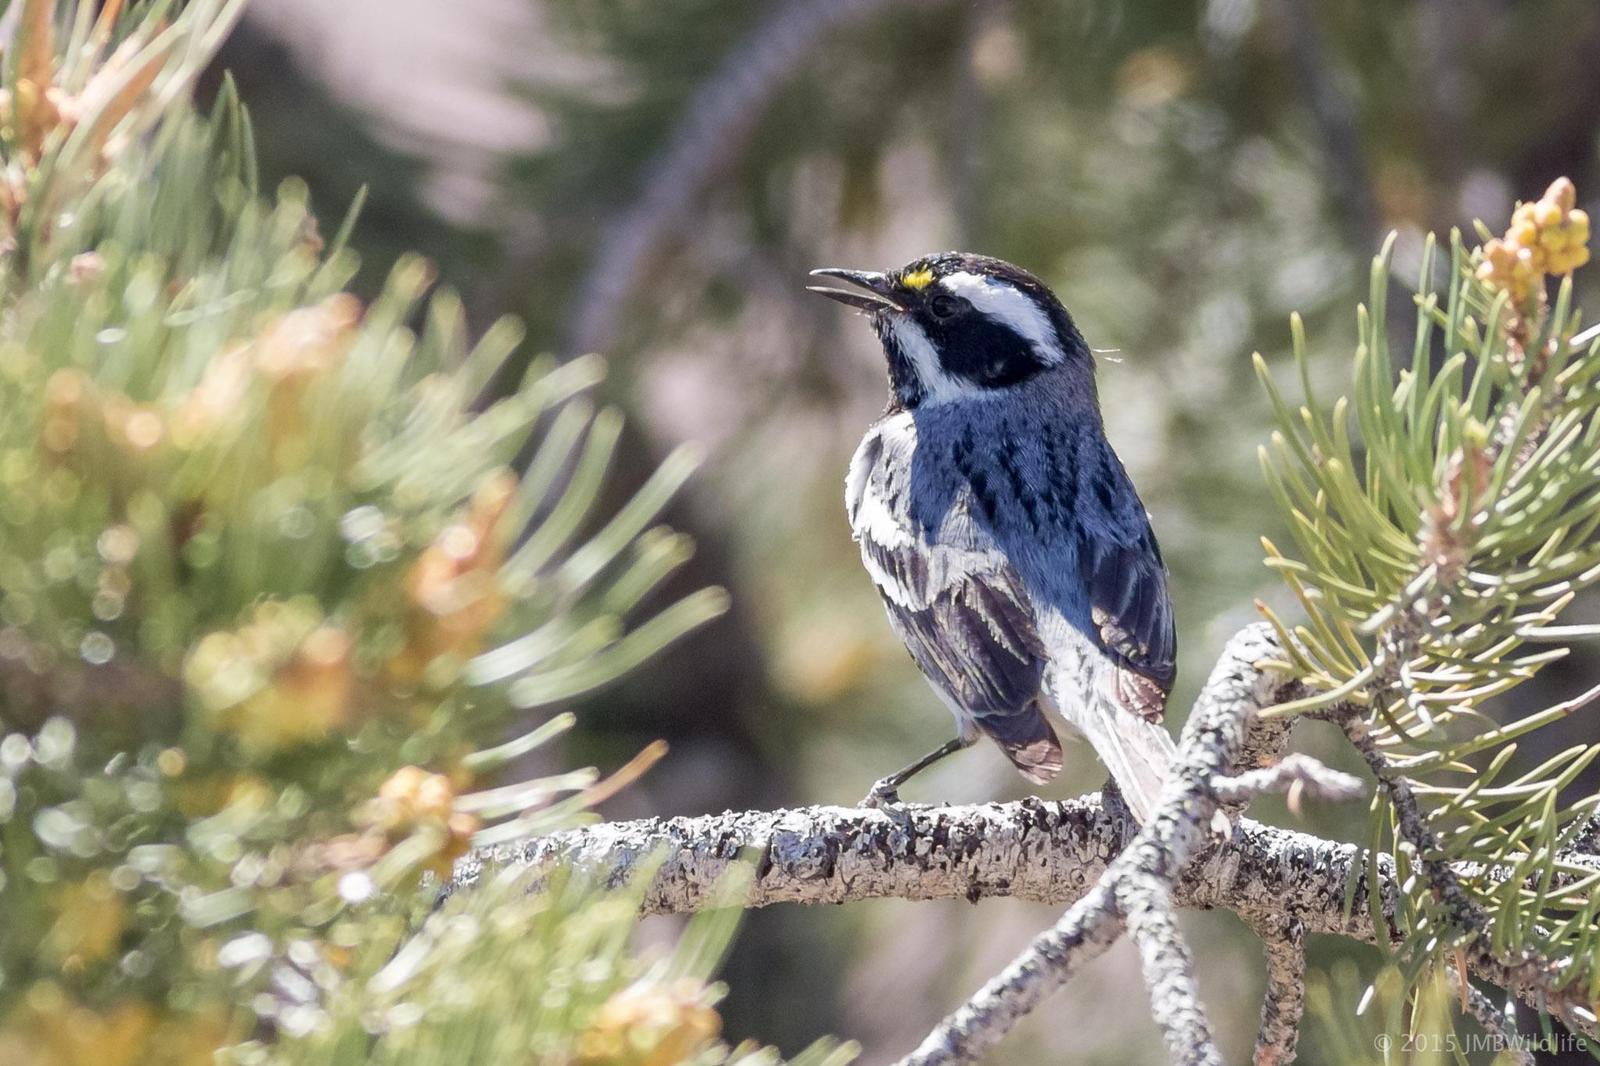 Black-throated Gray Warbler Photo by Jeff Bray